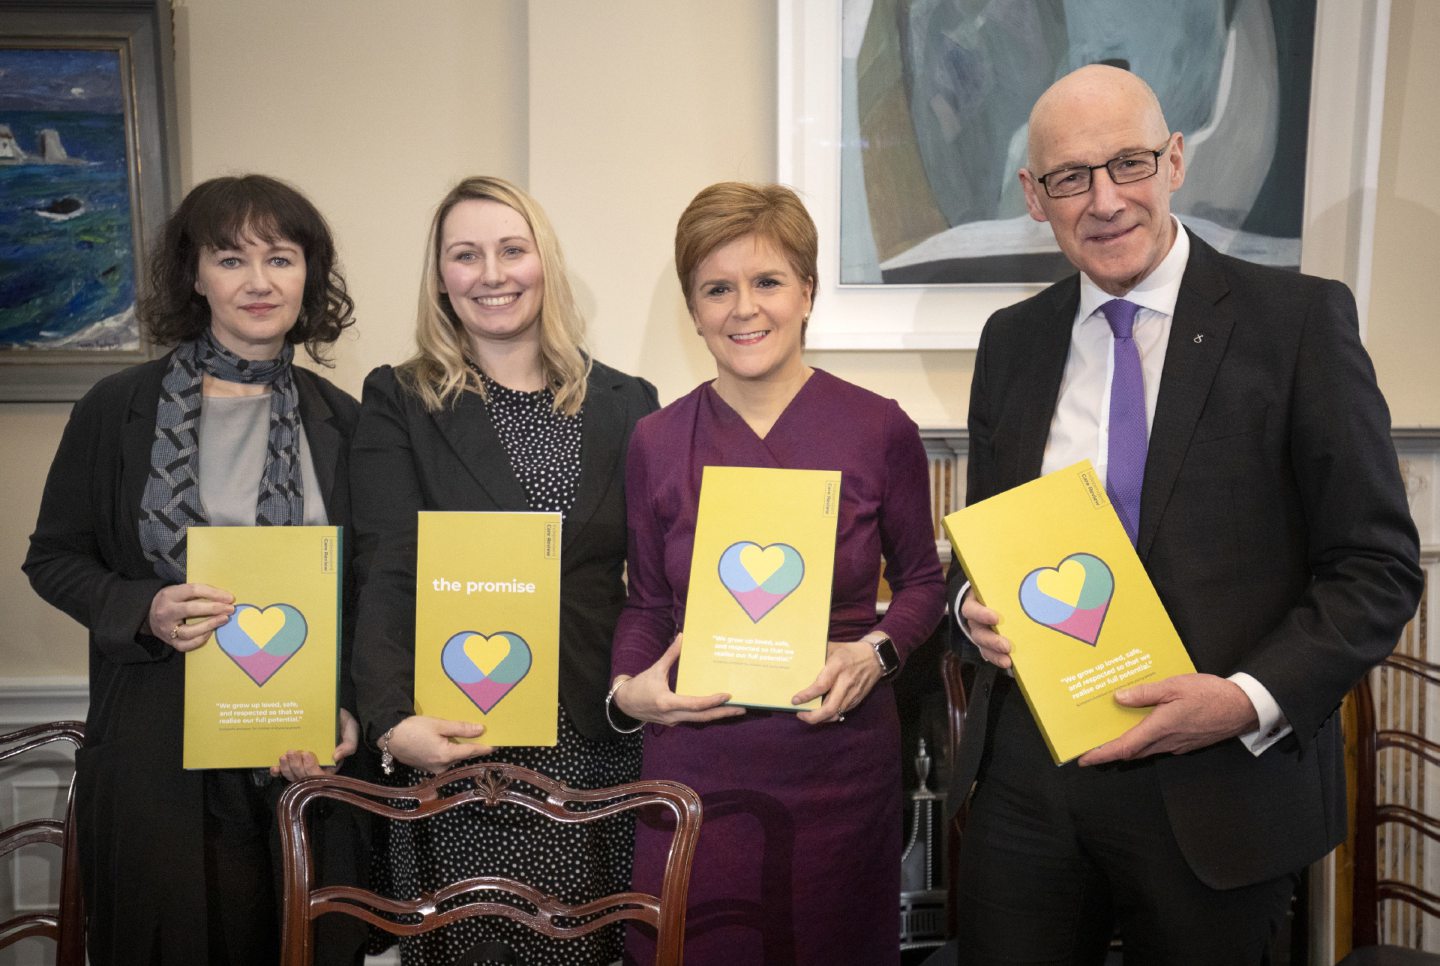 Chair Fiona Duncan, panel member Laura Beveridge, First Minister Nicola Sturgeon and Deputy First Minister John Swinney with copies of the Independent Care Review report at Bute House, Edinburgh.